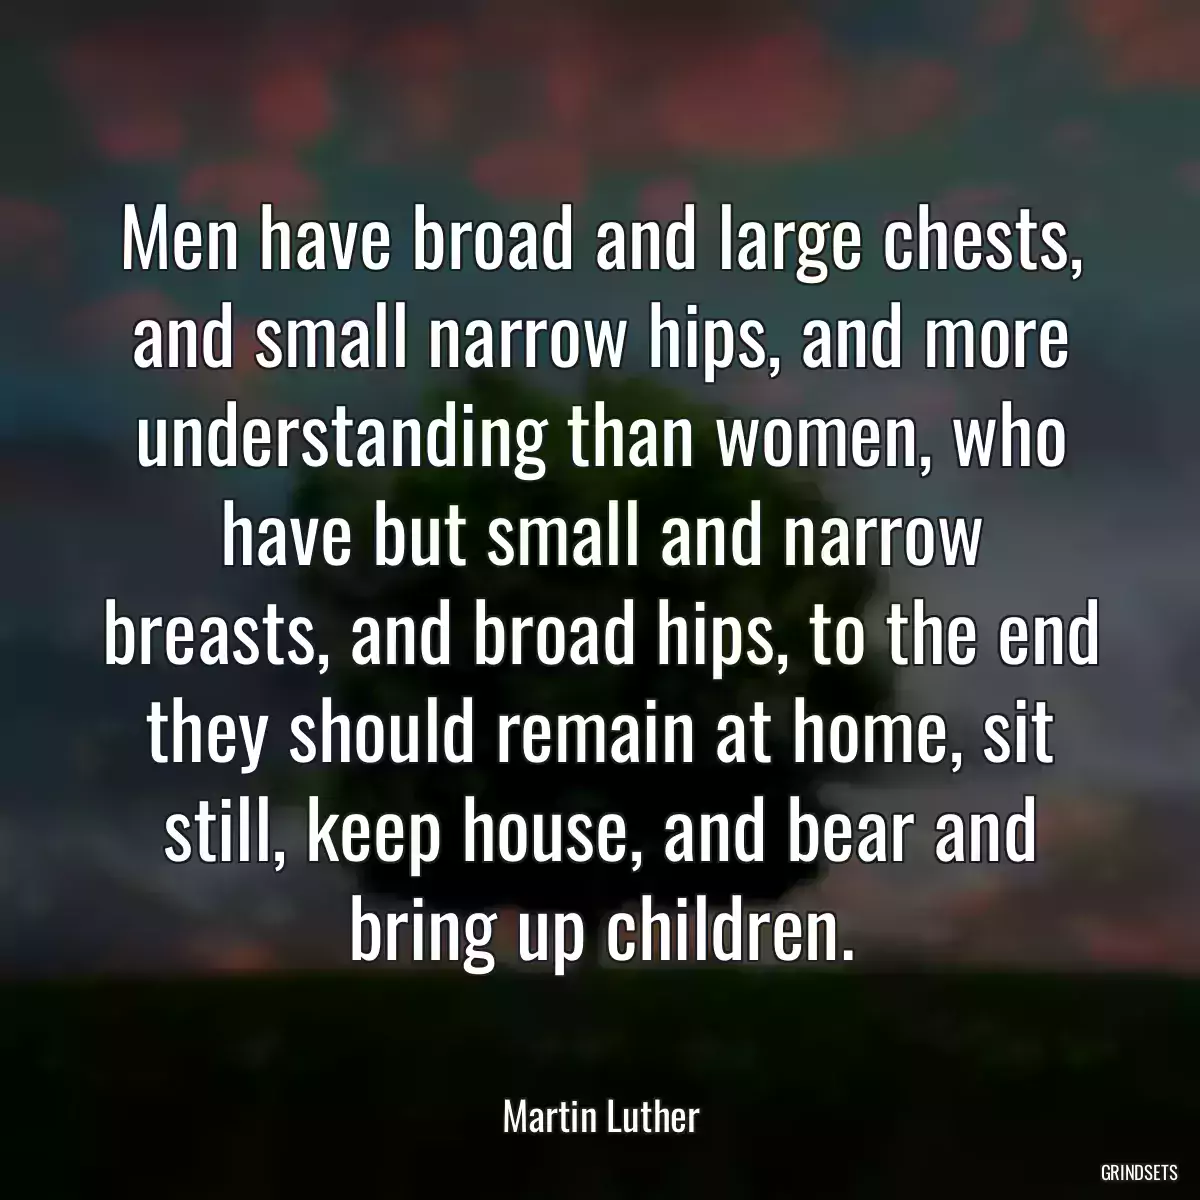 Men have broad and large chests, and small narrow hips, and more understanding than women, who have but small and narrow breasts, and broad hips, to the end they should remain at home, sit still, keep house, and bear and bring up children.